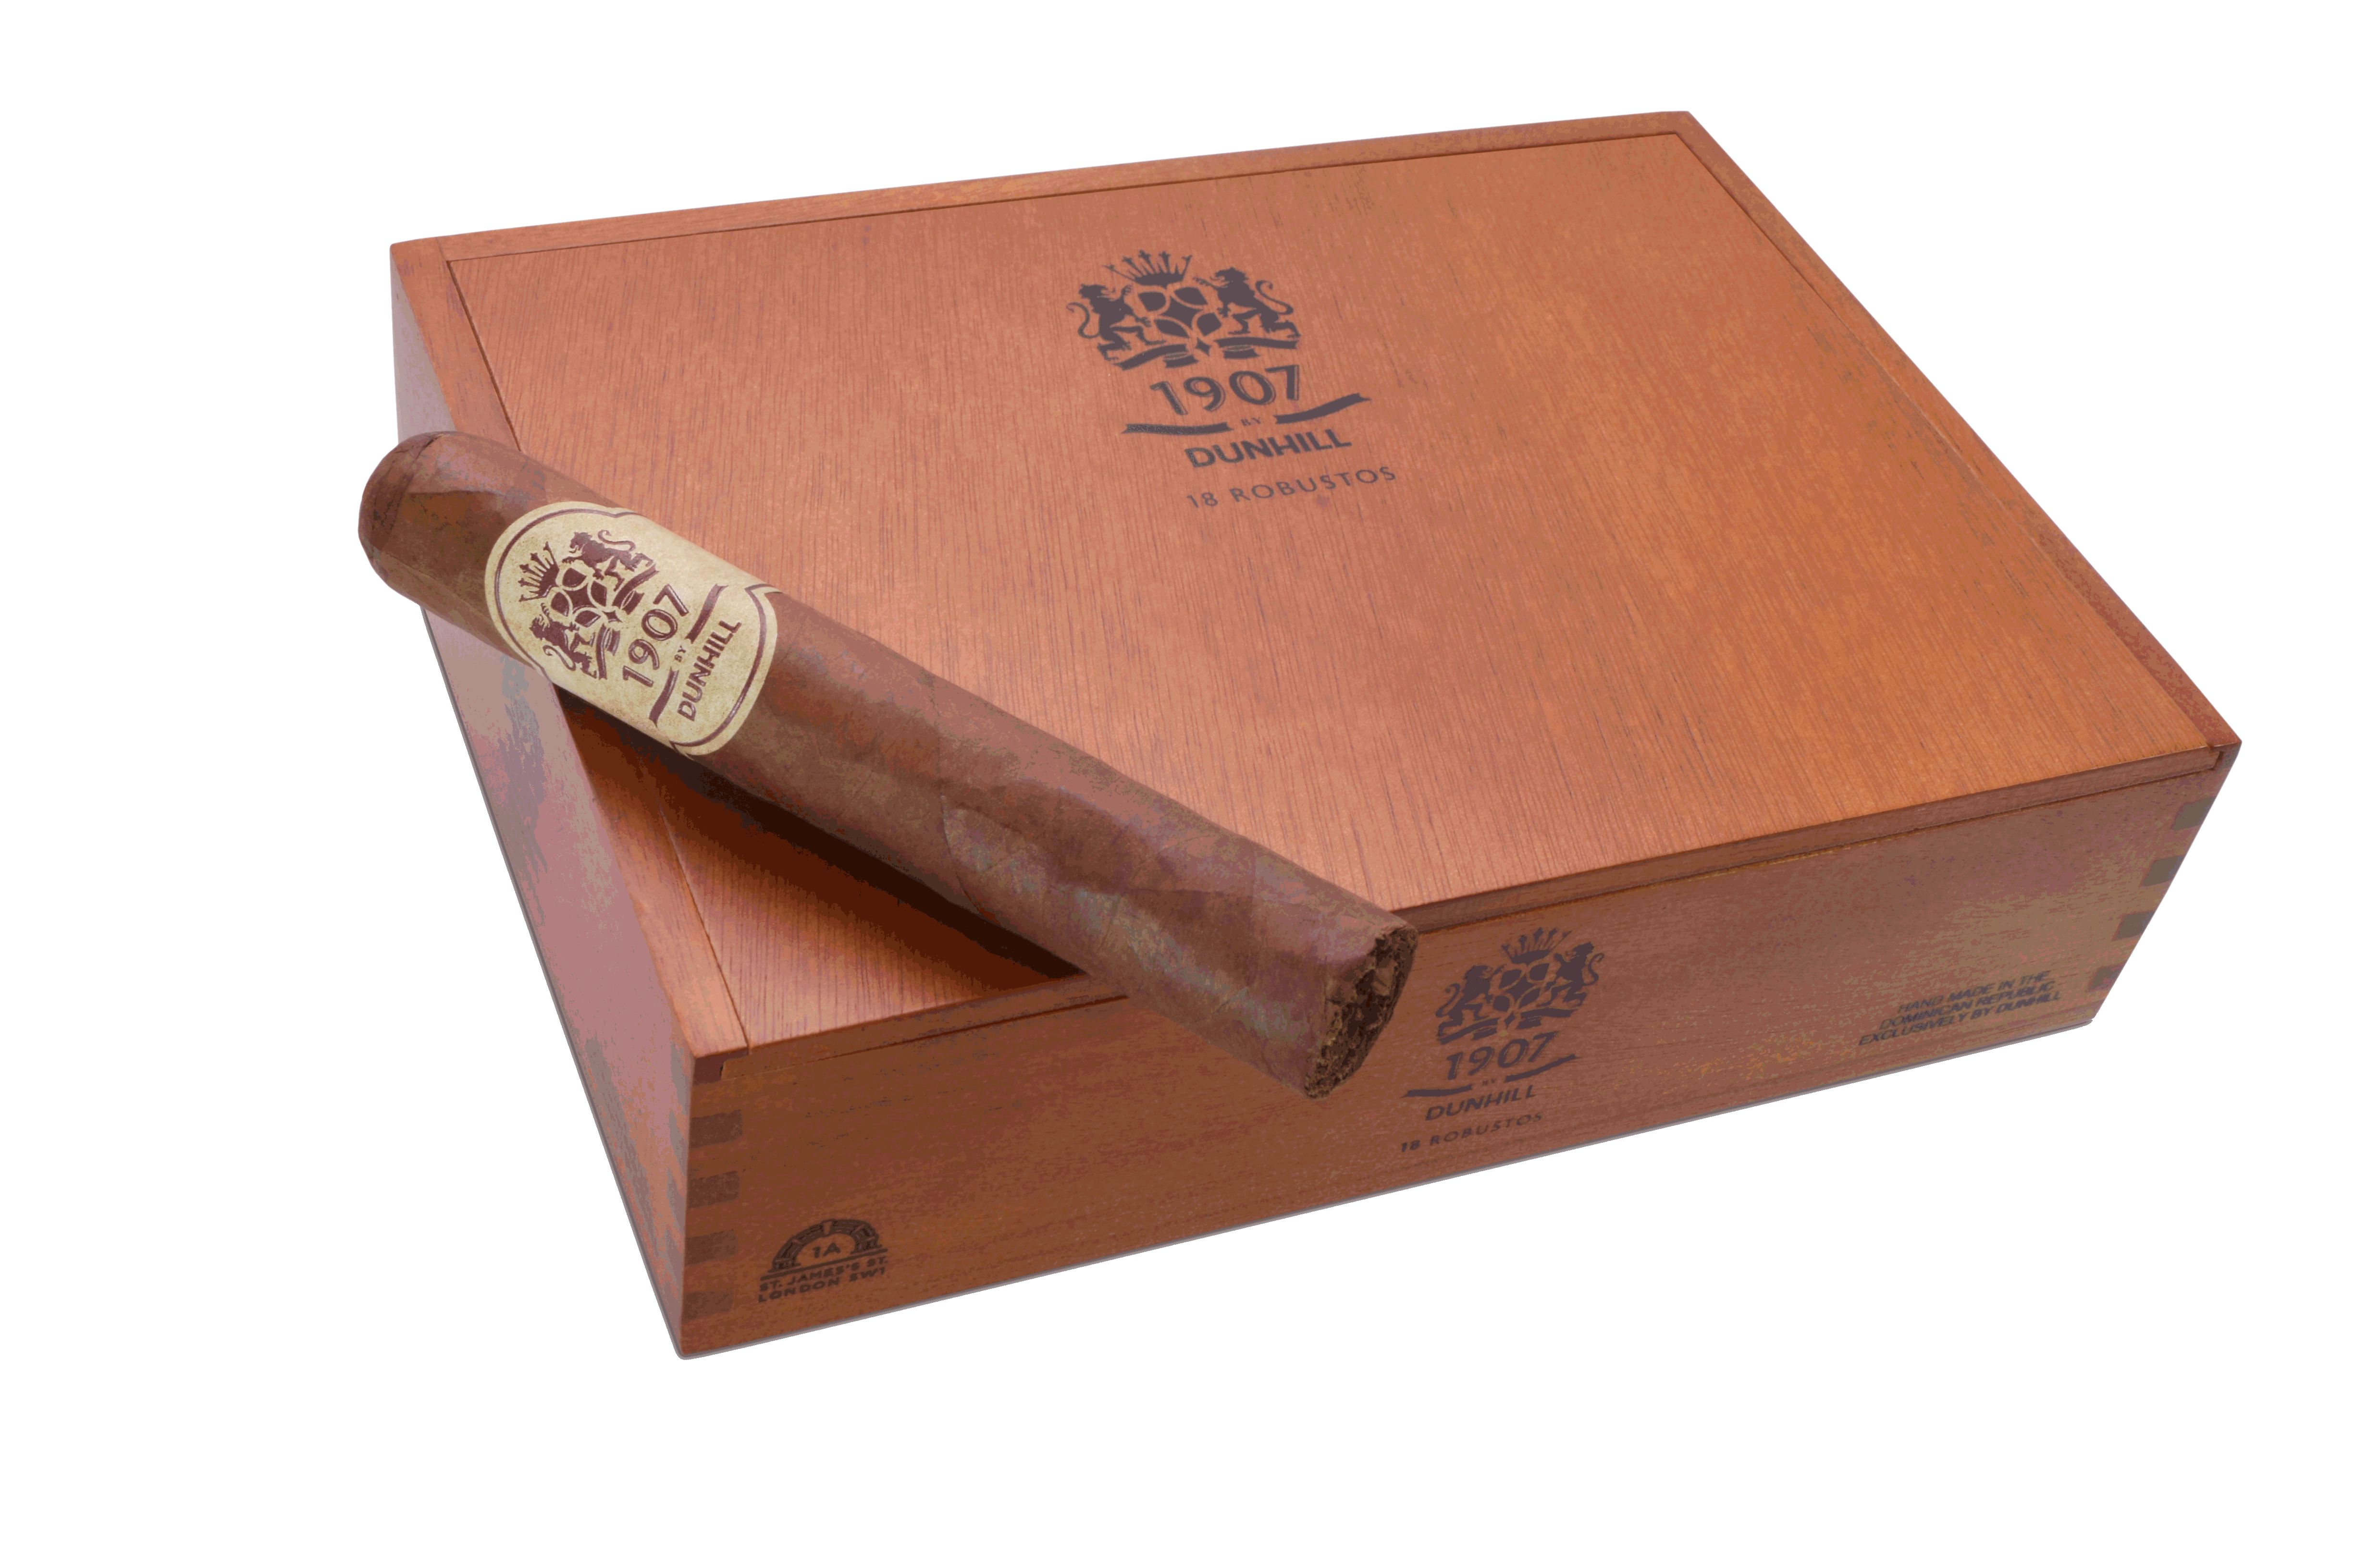 1907 by Dunhill closed box with cigar